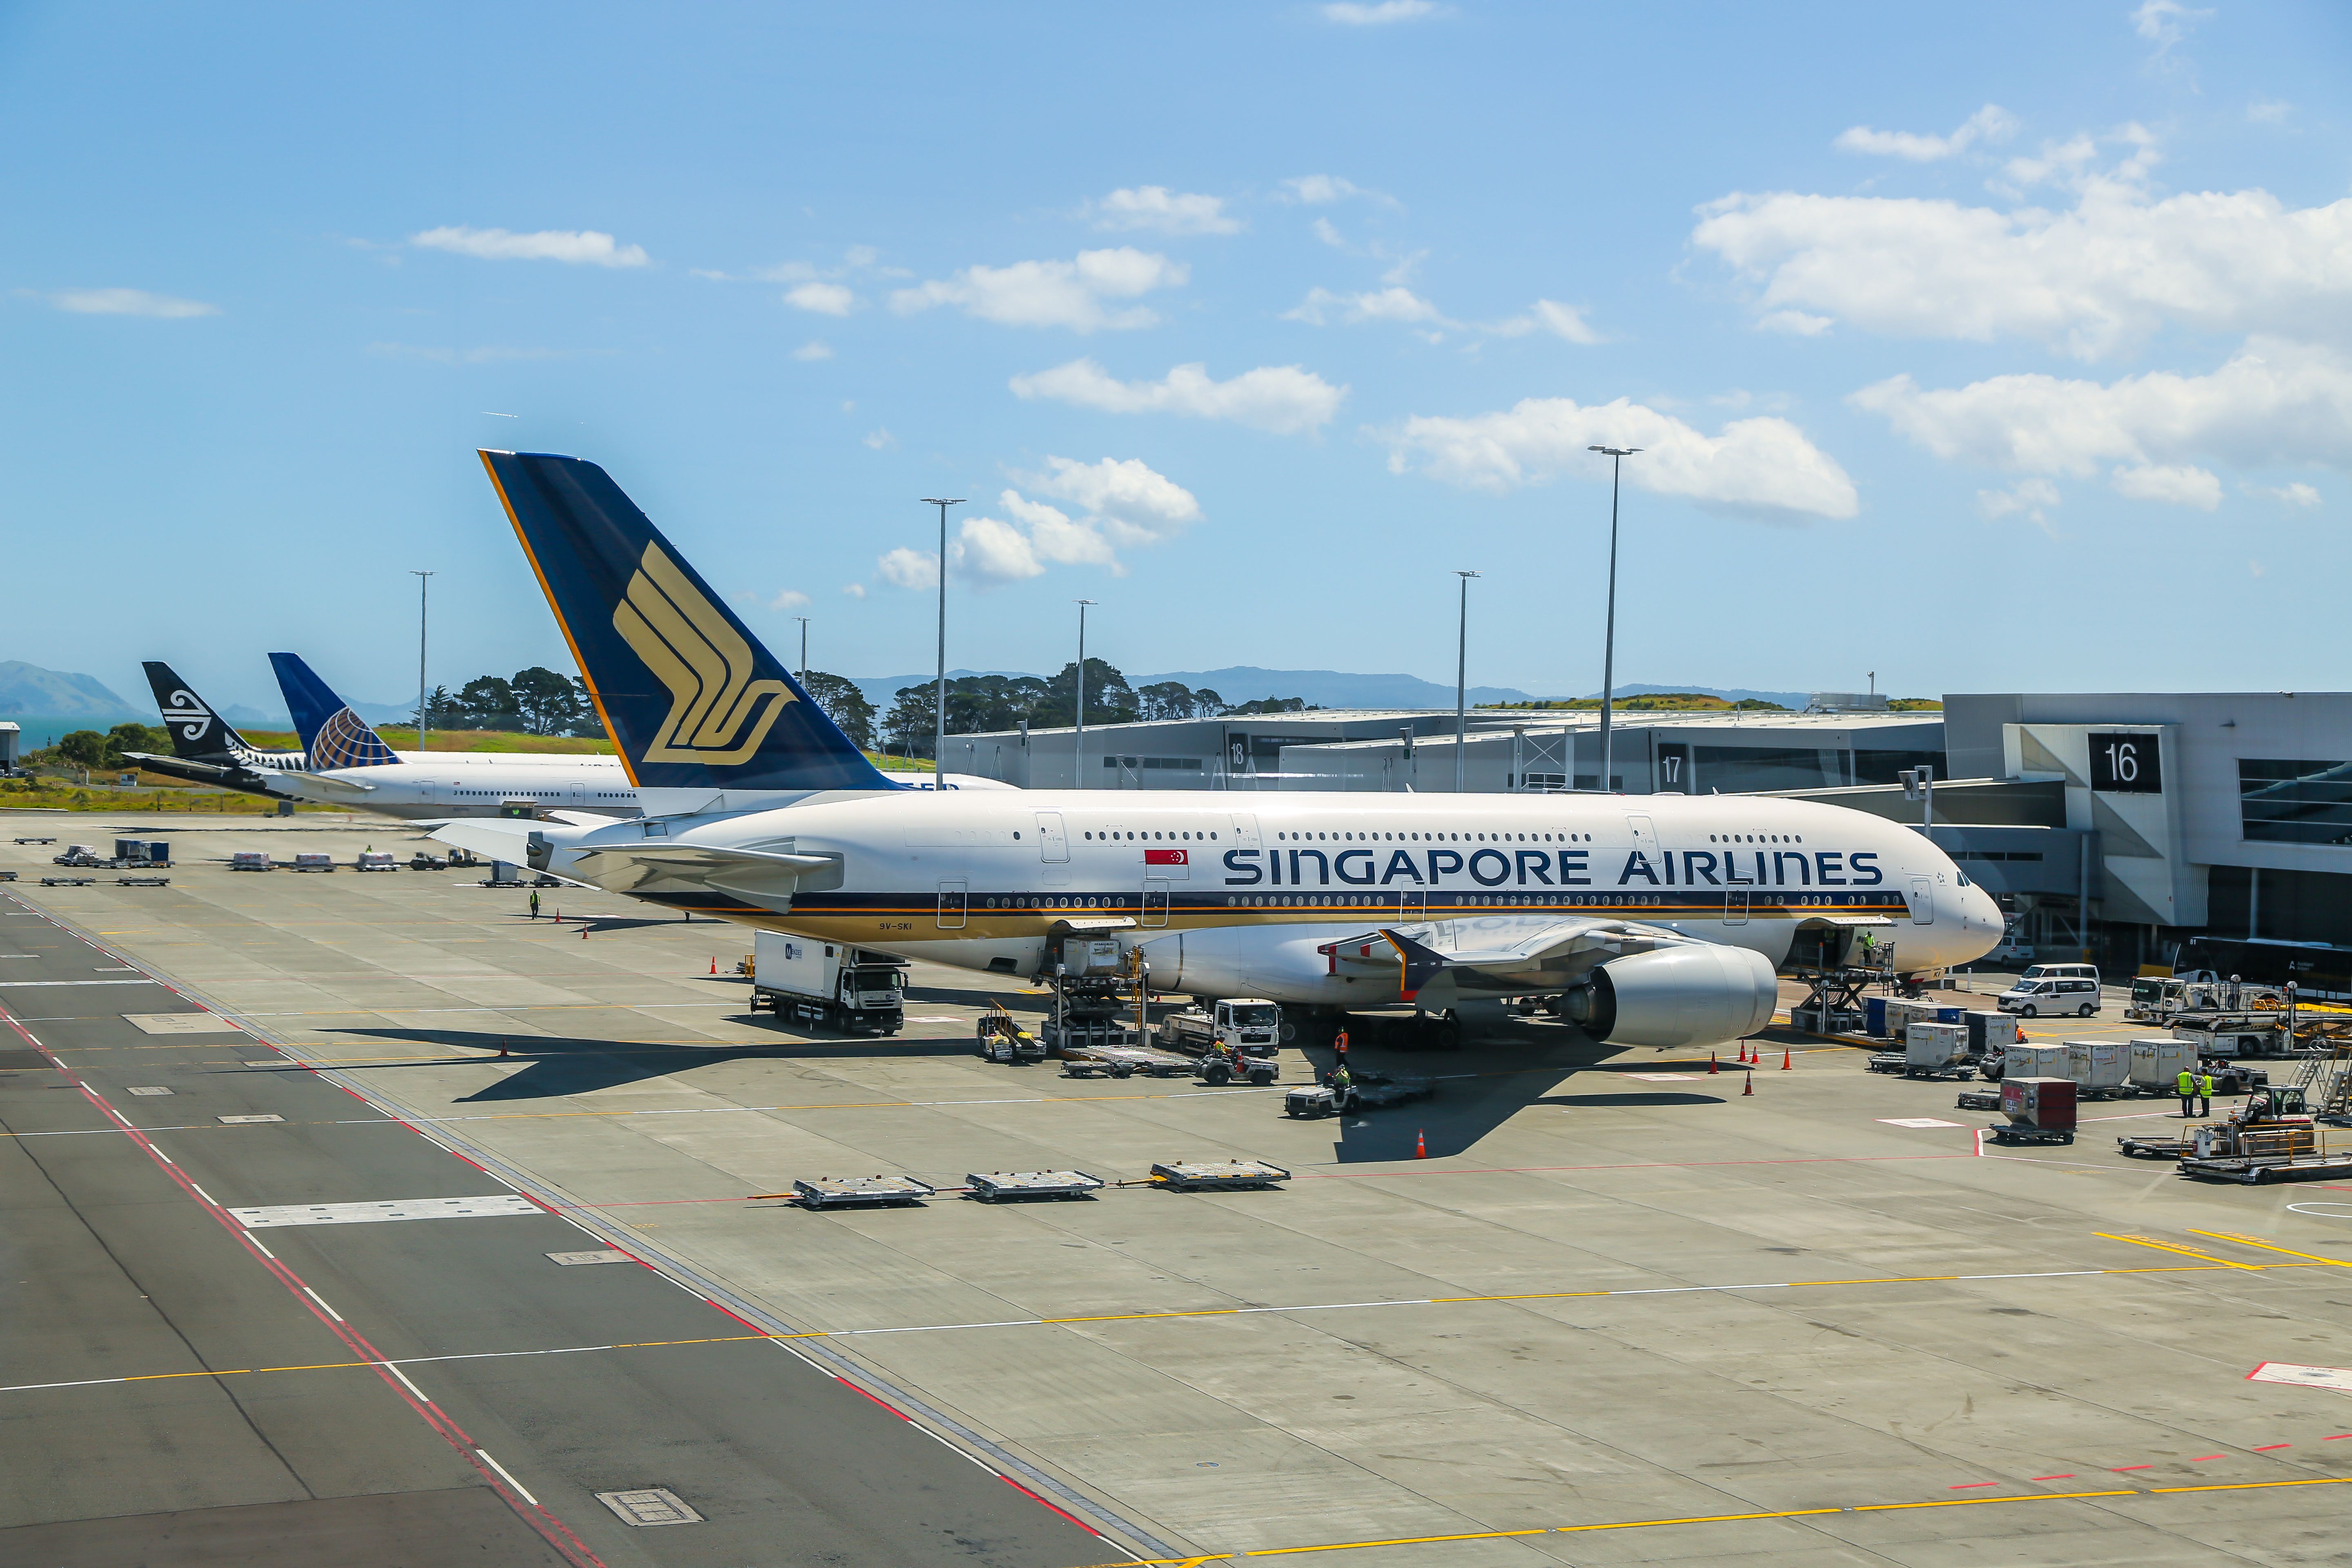 Singapore Airlines Airbus A380 at Gate 16 at Auckland Airport.